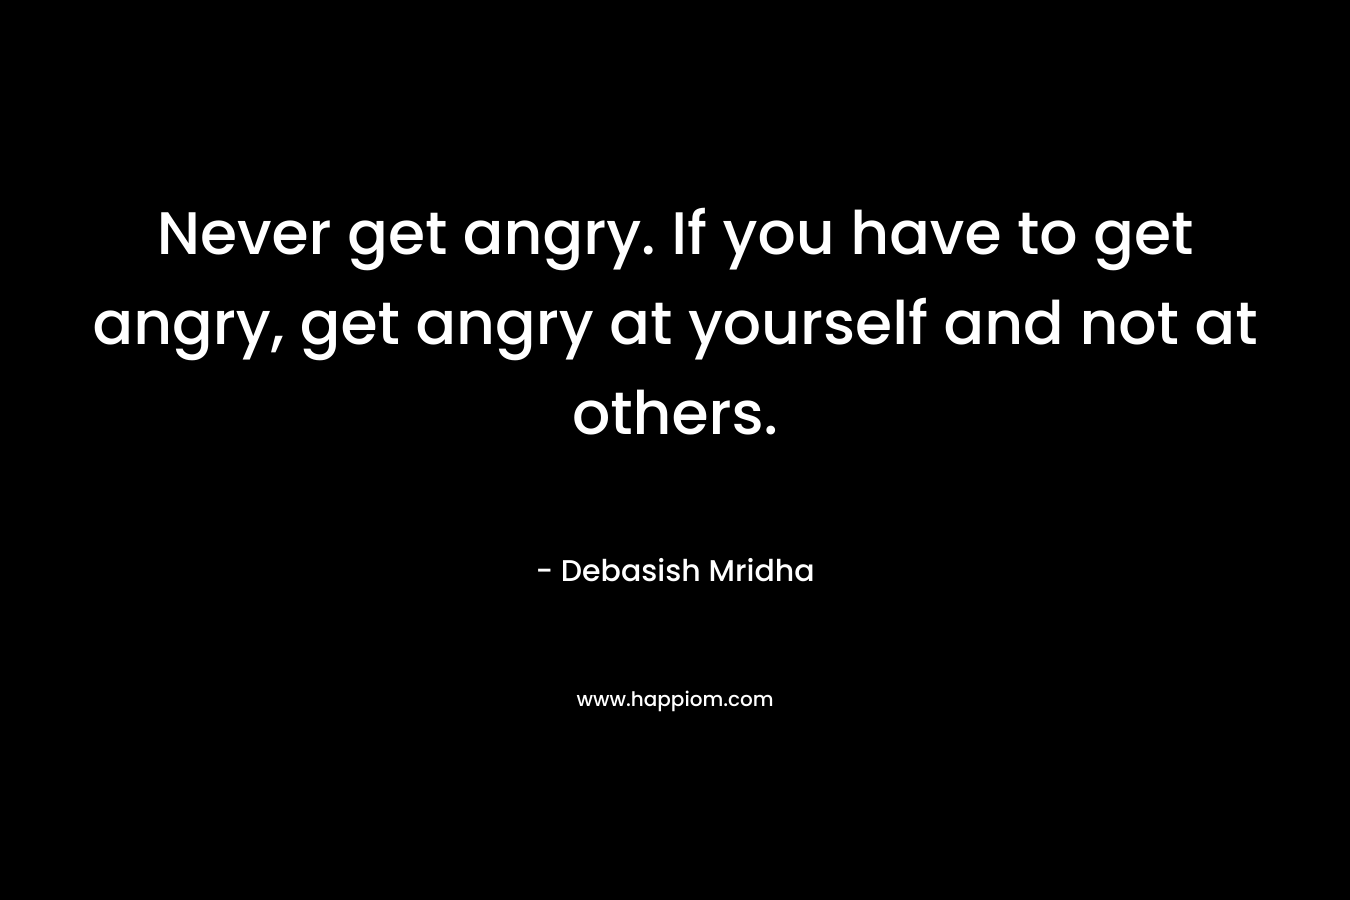 Never get angry. If you have to get angry, get angry at yourself and not at others.